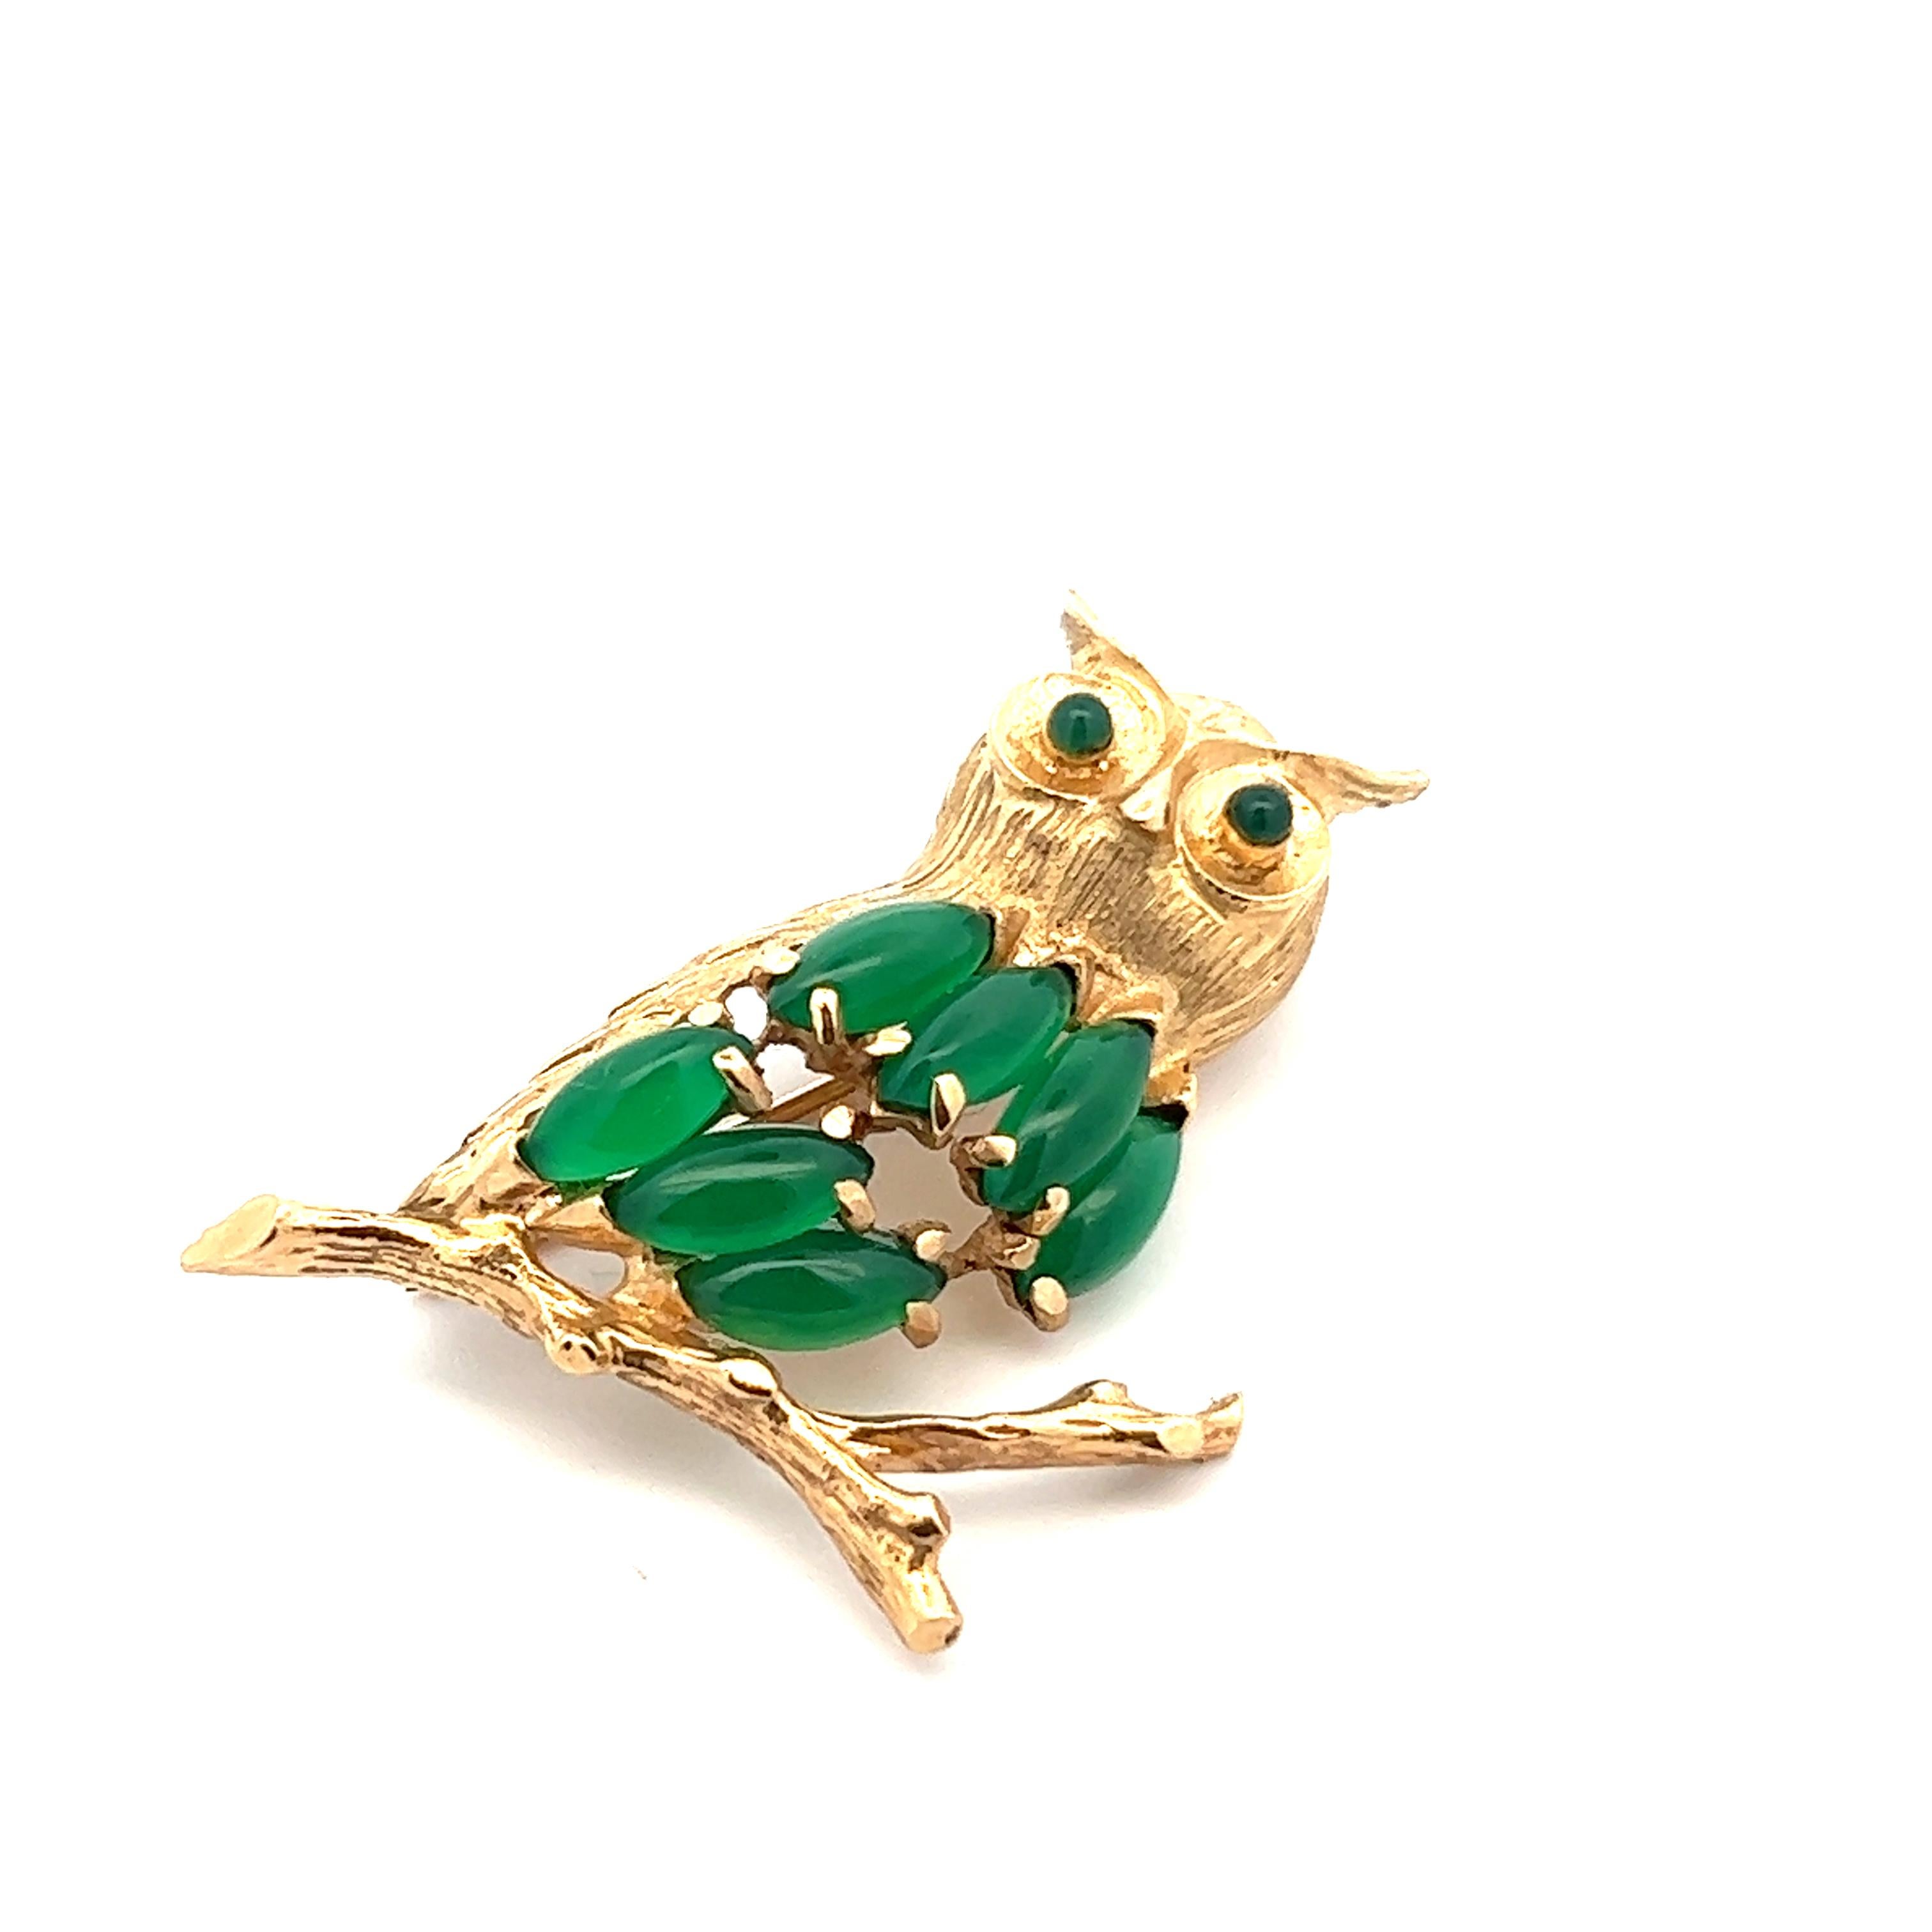 14K Yellow Gold Owl Pin with Chalcedony Body and Eyes  In Excellent Condition For Sale In Lexington, KY